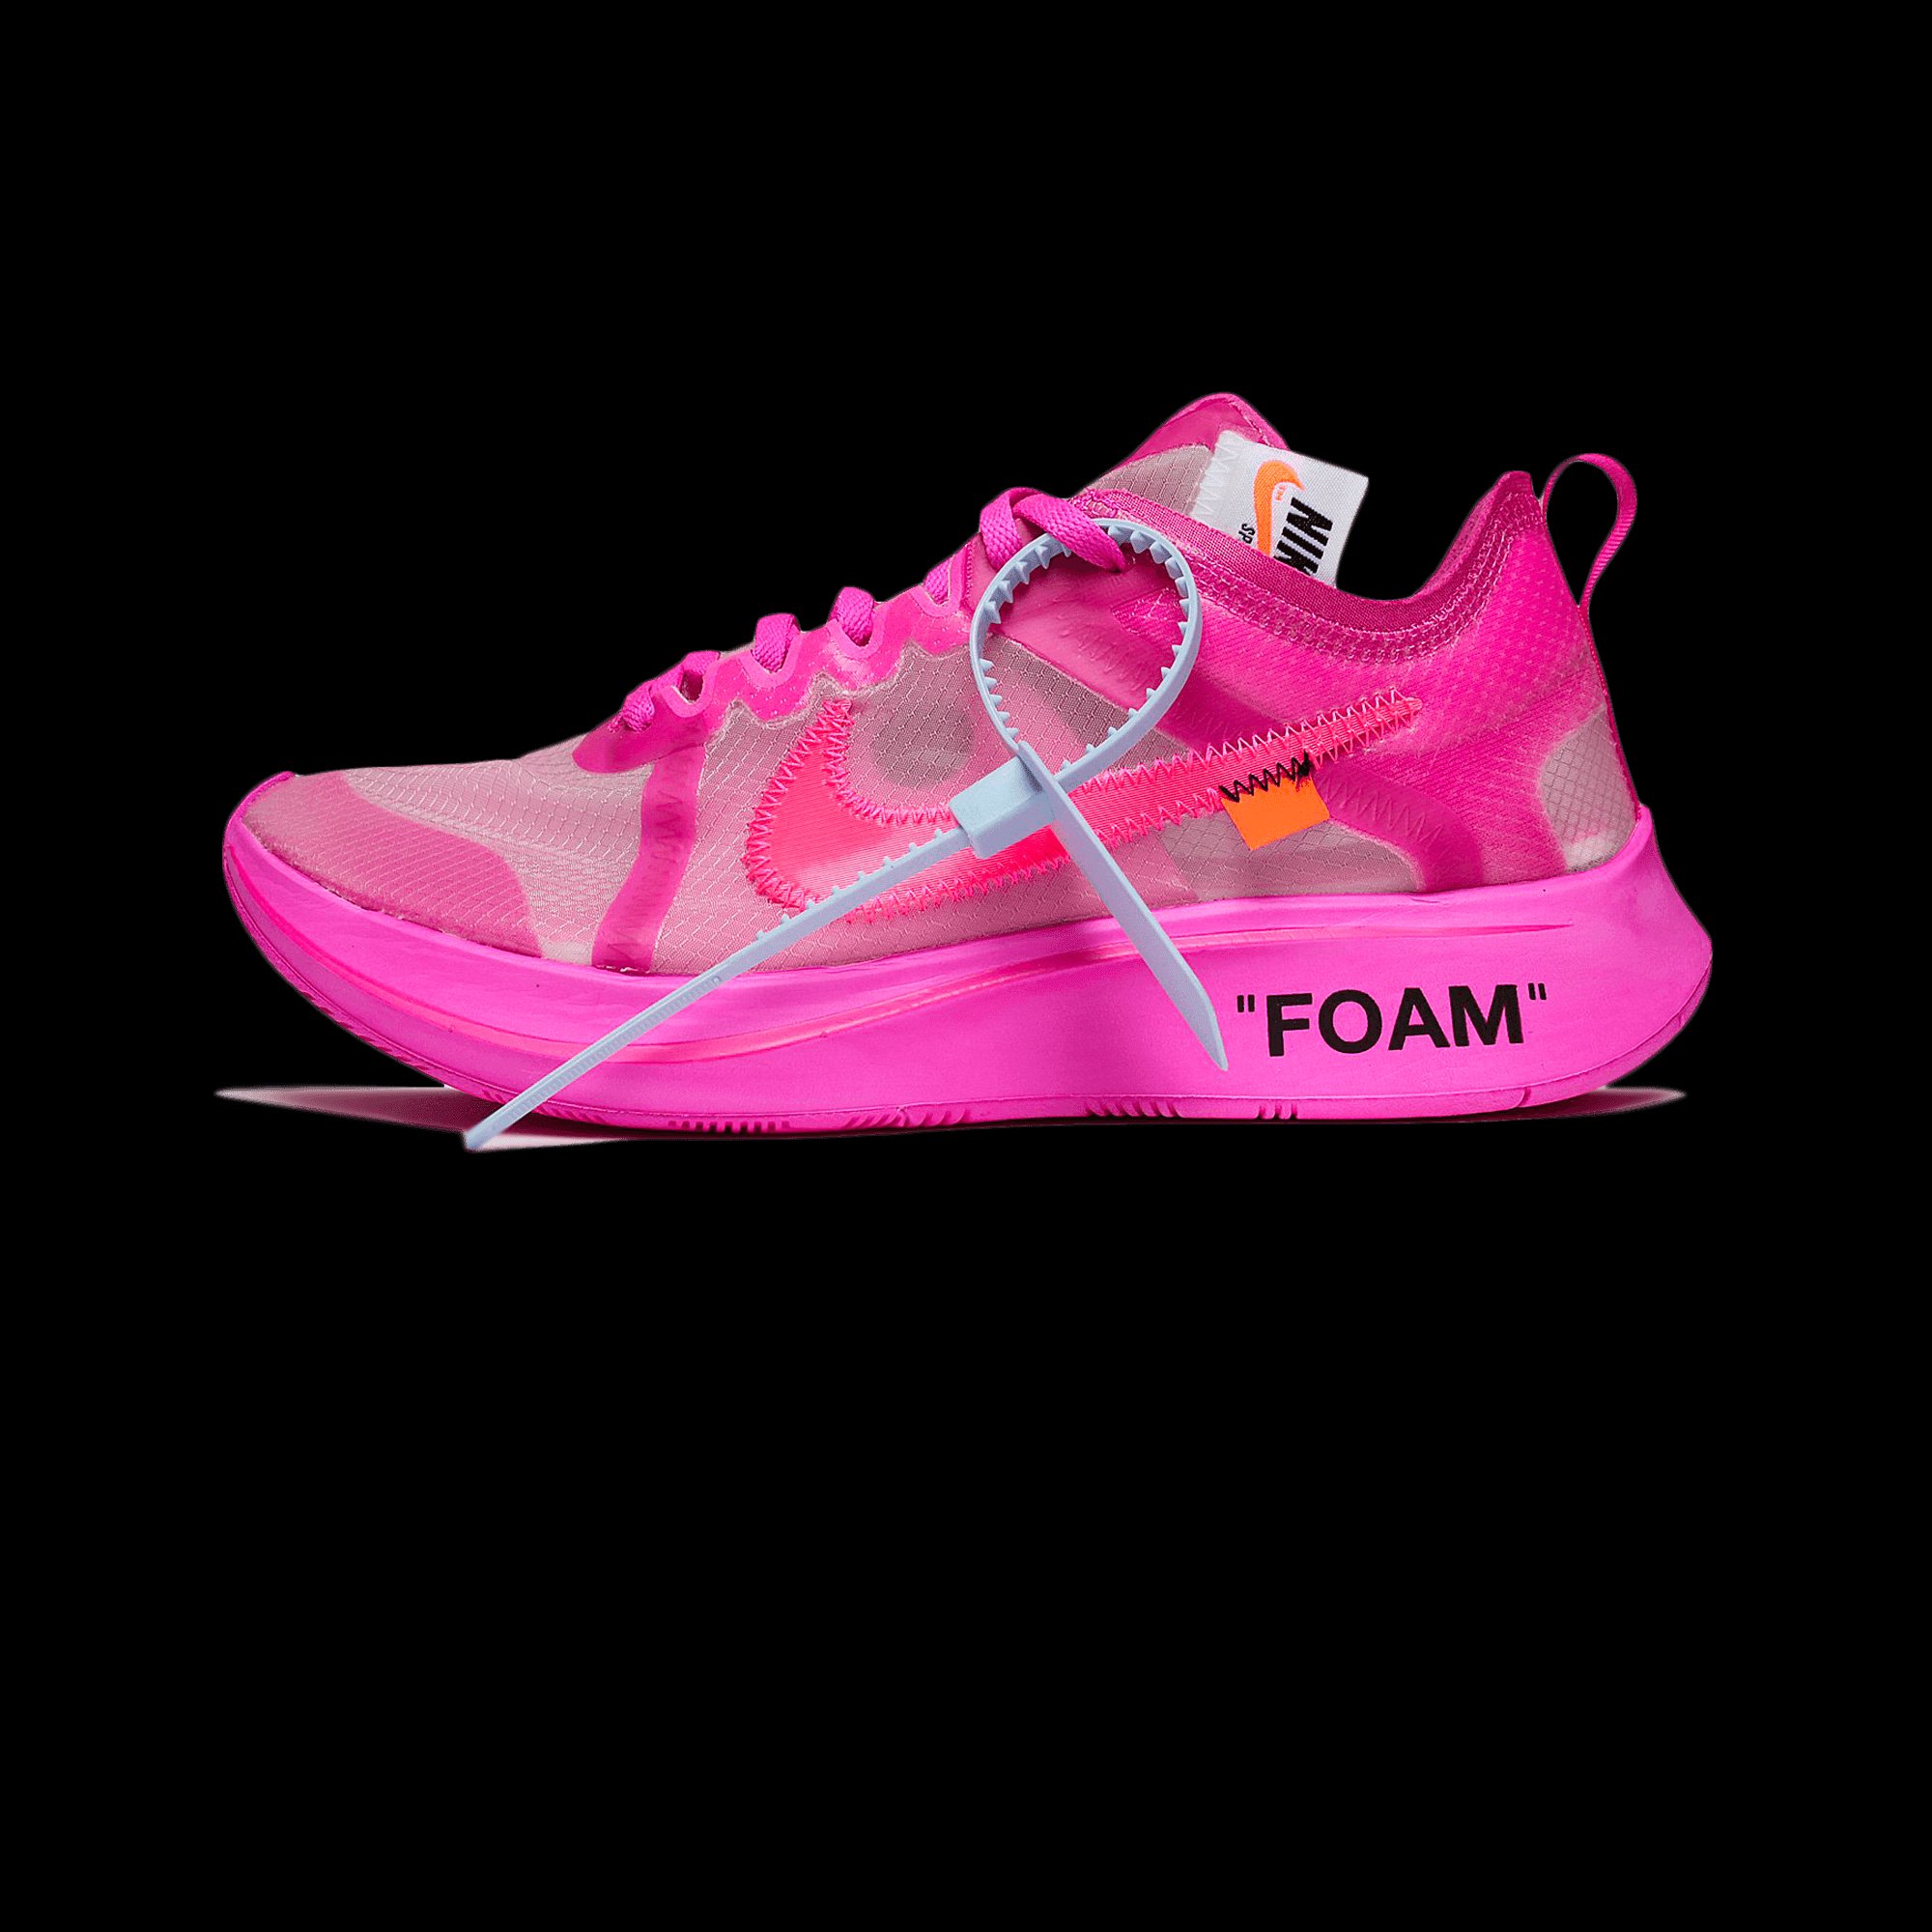 Wts zoom fly x off white pink - Meetapp